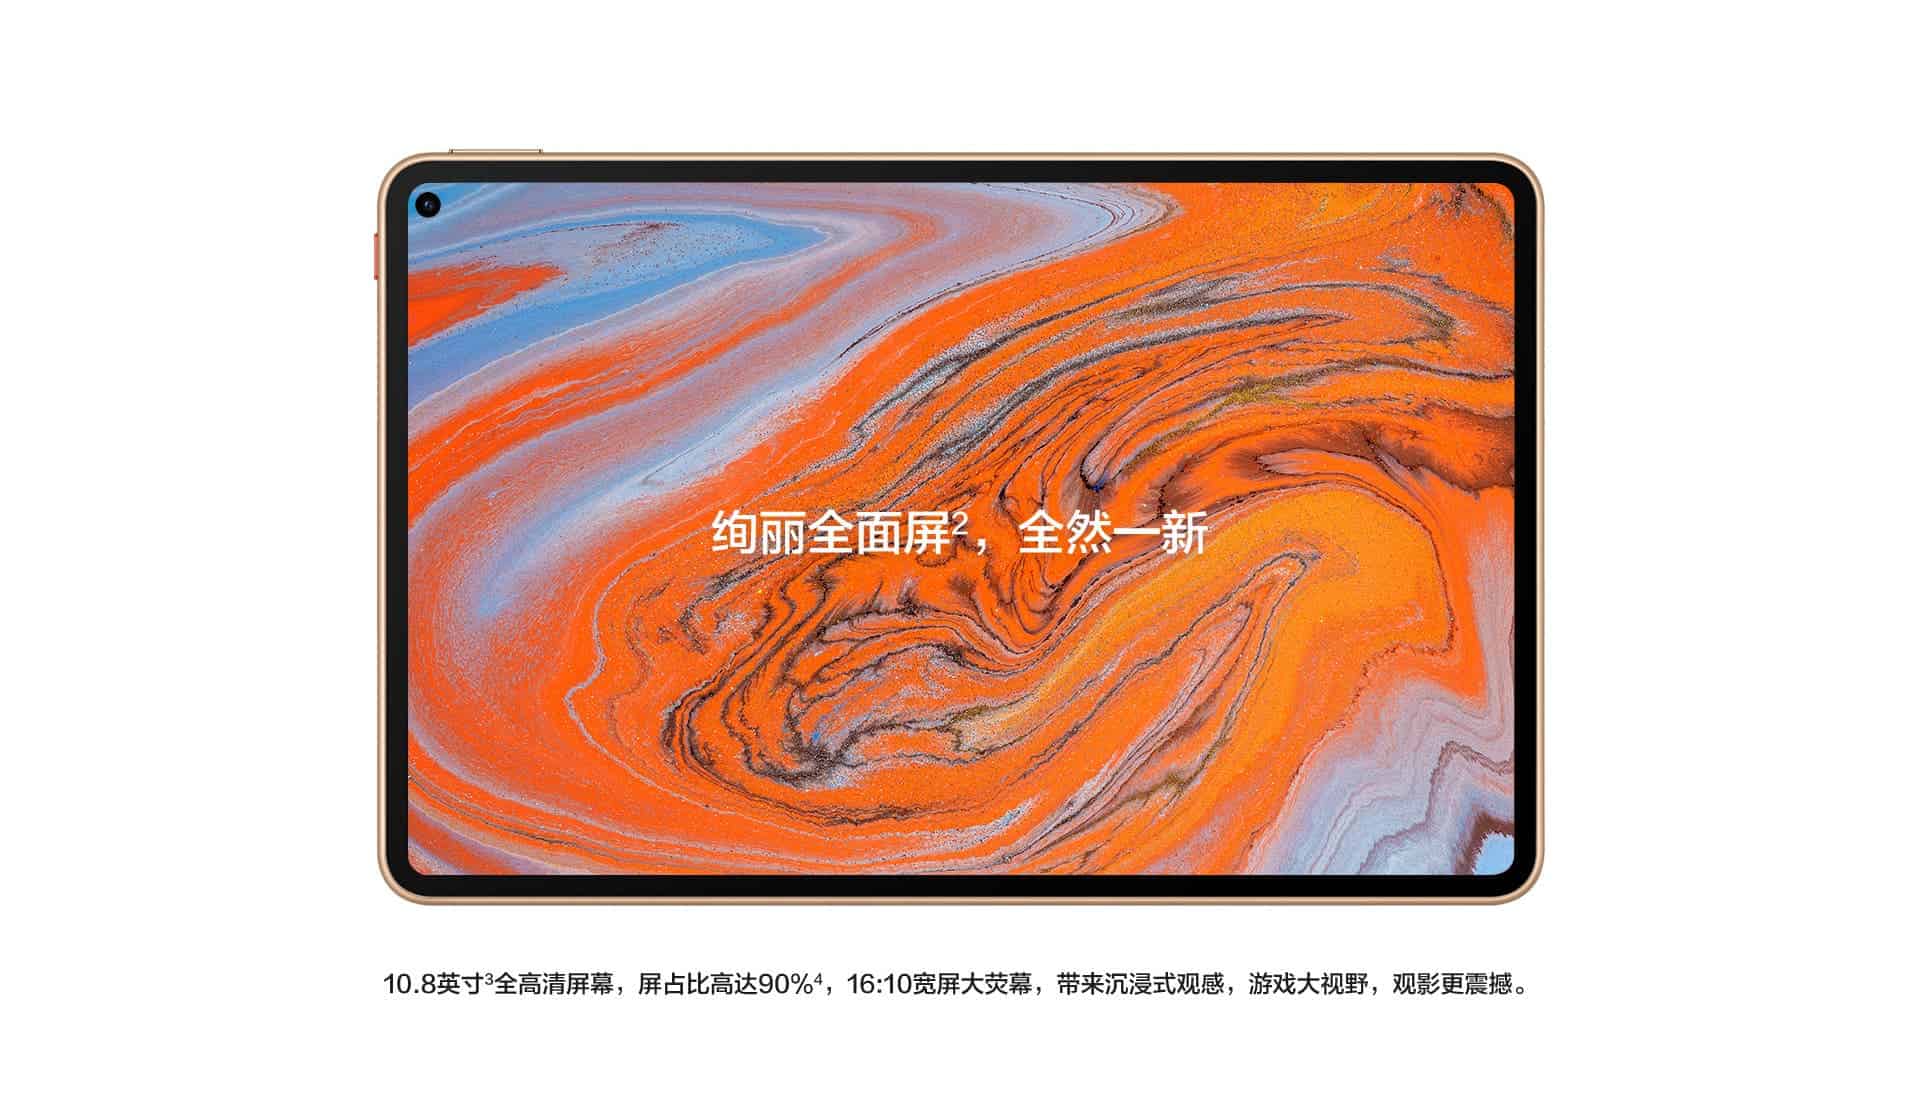 Huawei MatePad Pro 5G Officially Launched with Kirin 990 5G